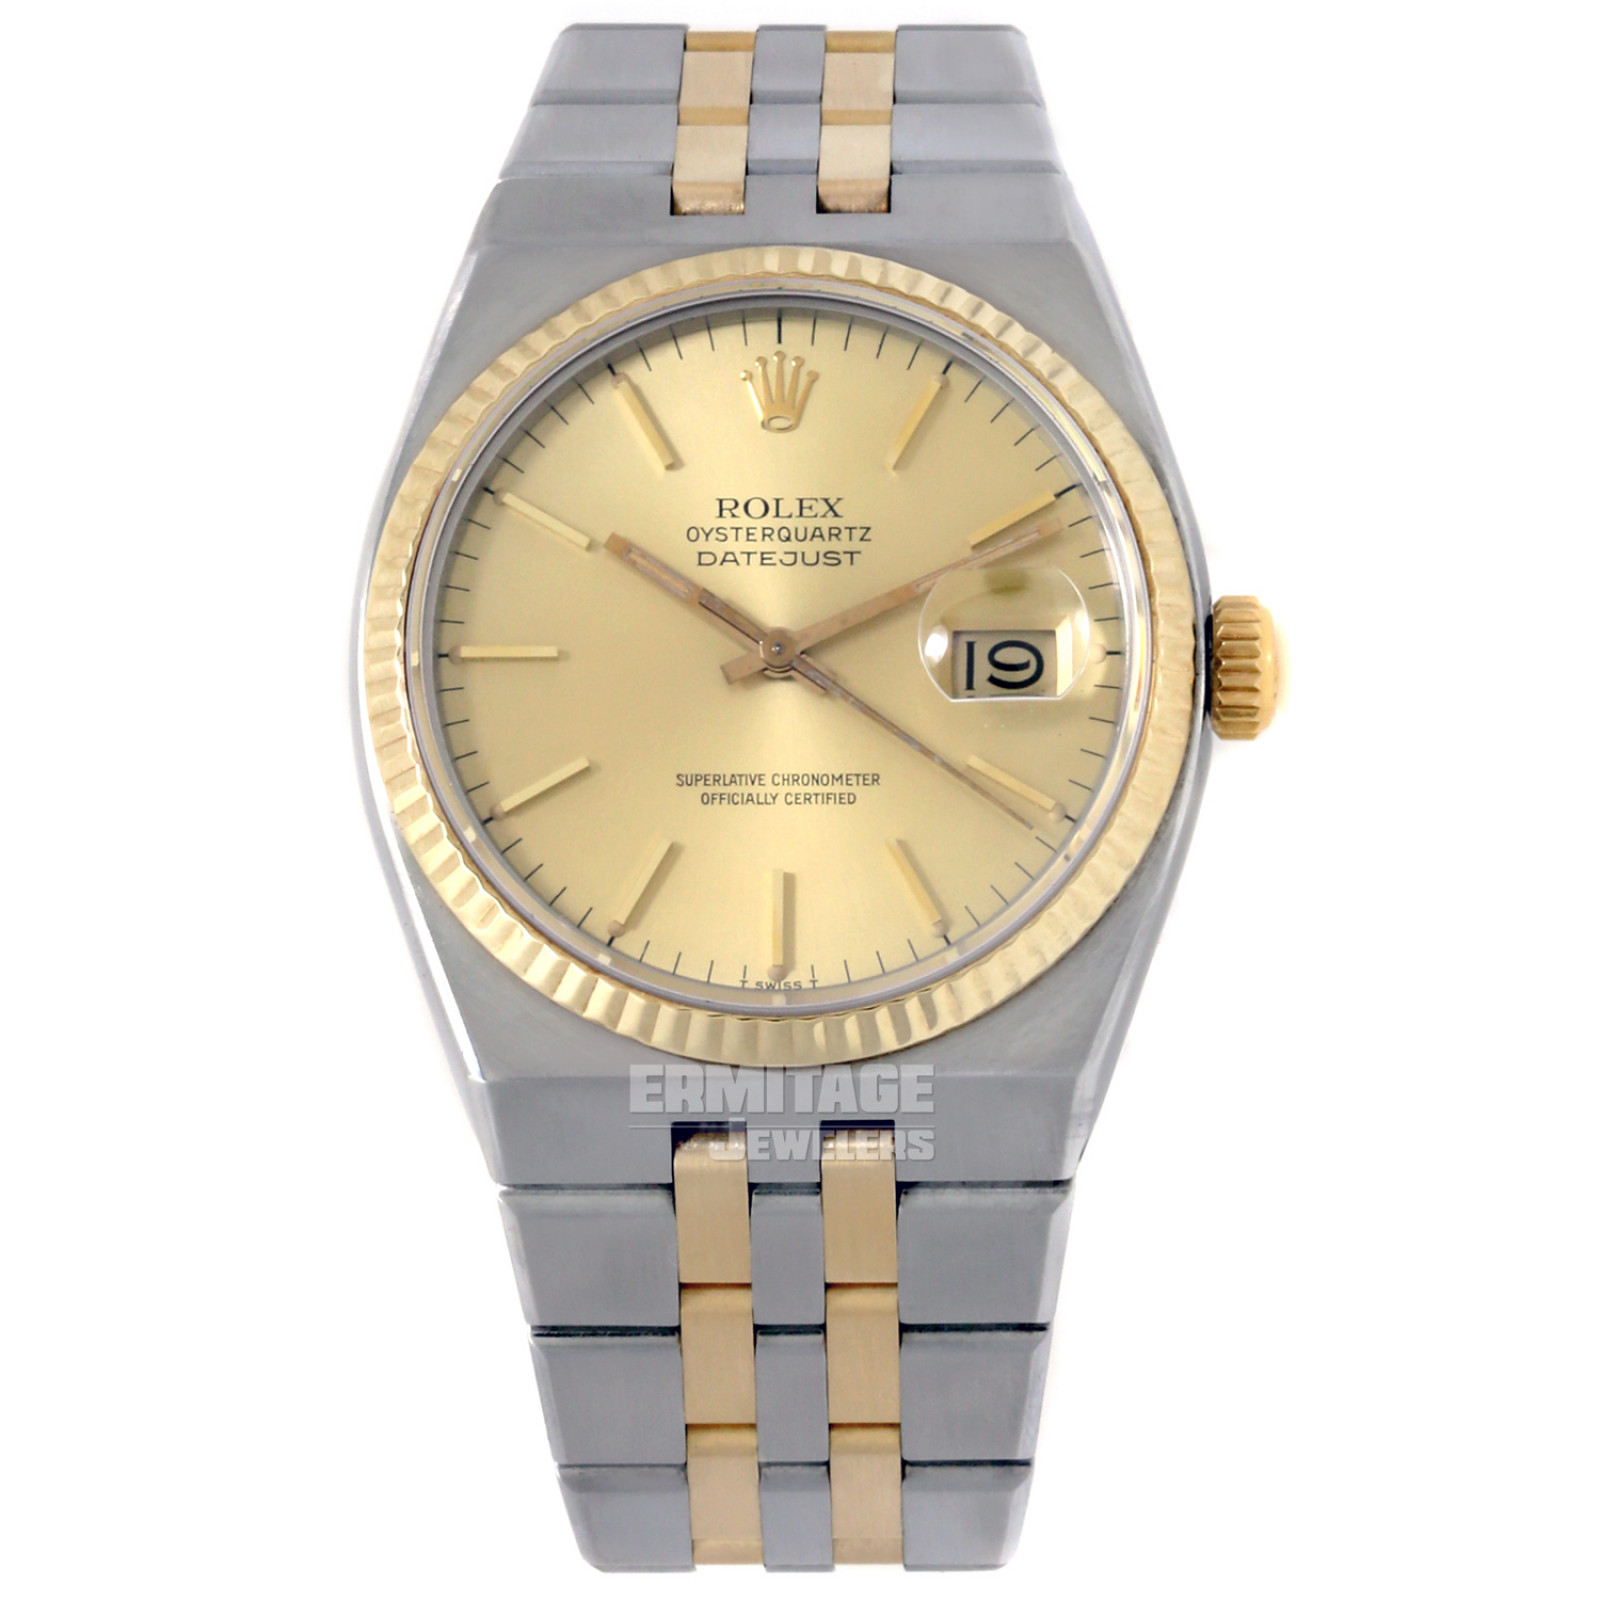 Selling your Rolex Oysterquartz 17013